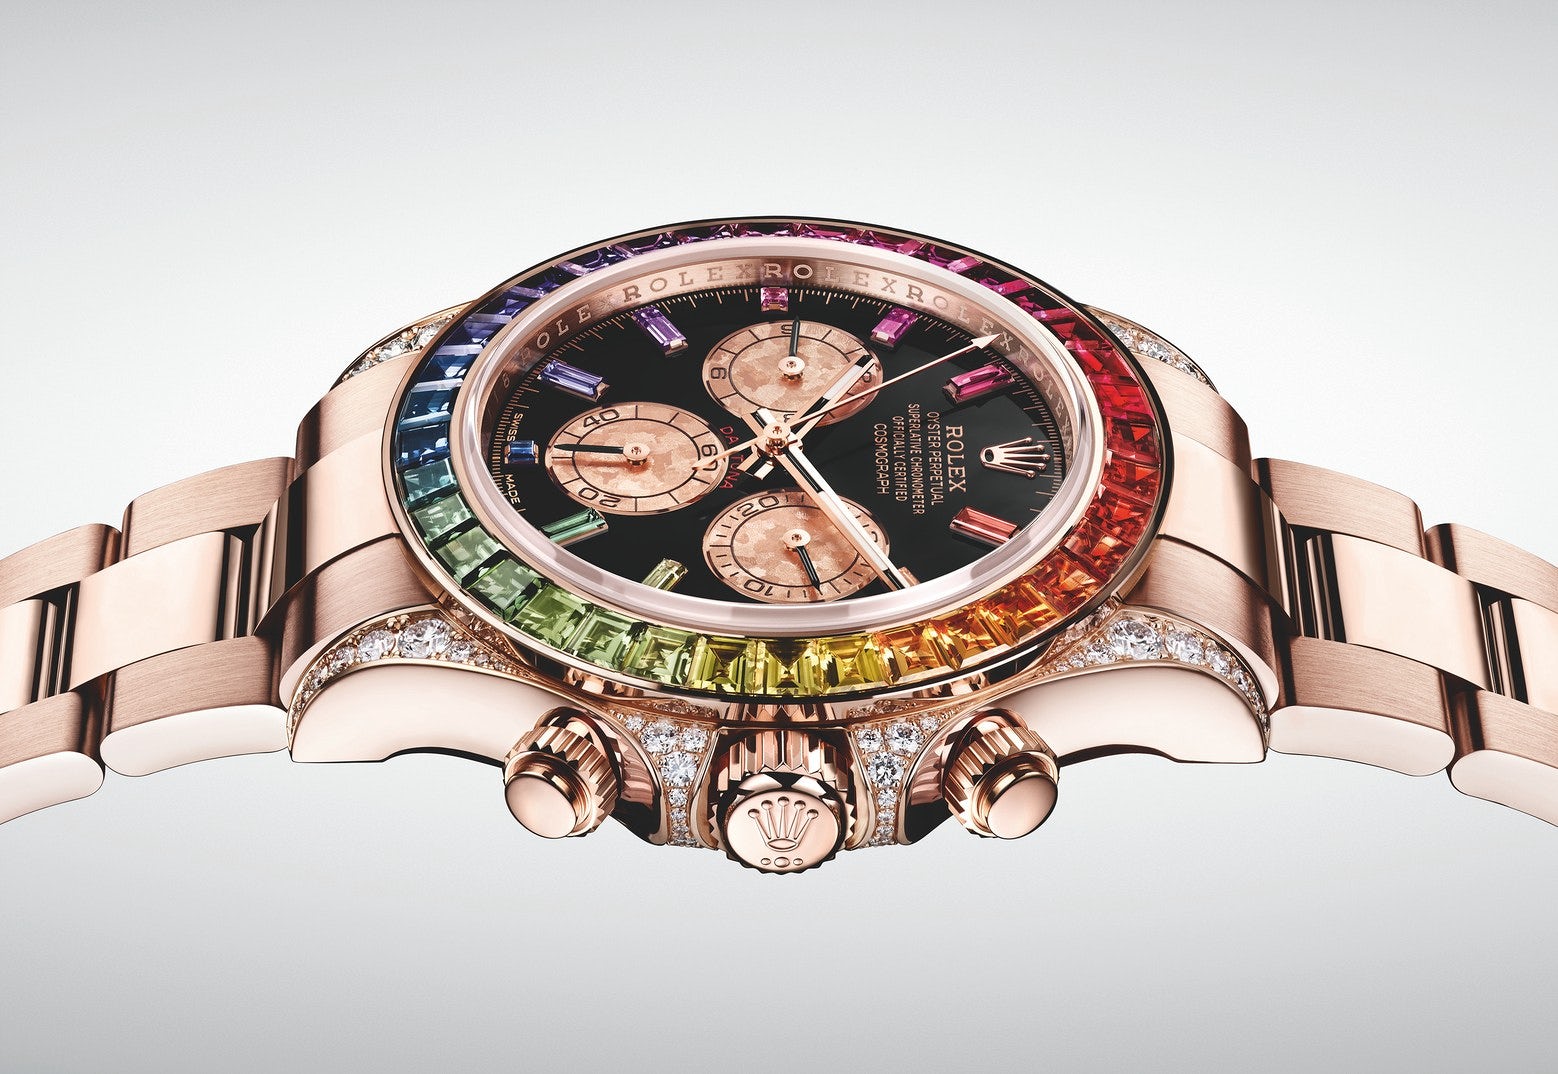 When More Is More: A Spectrum Of Rainbow Watches